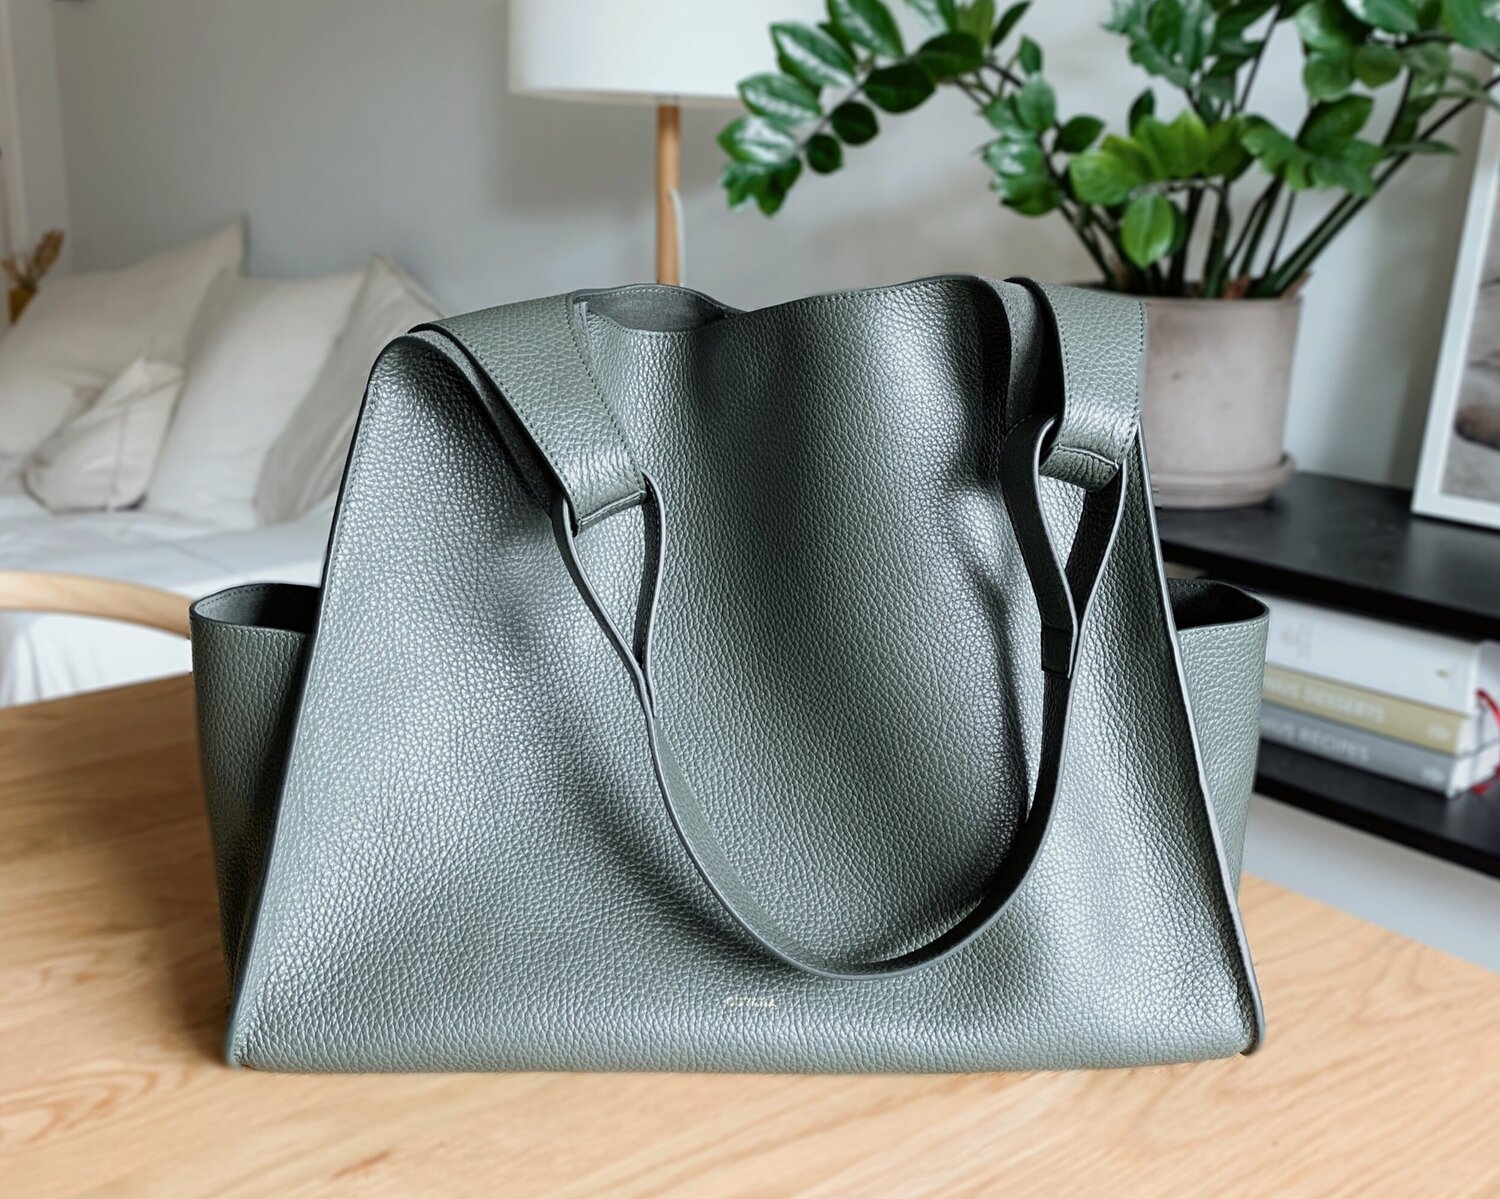 One Bag, Double Loops, Three Sizes - Cuyana